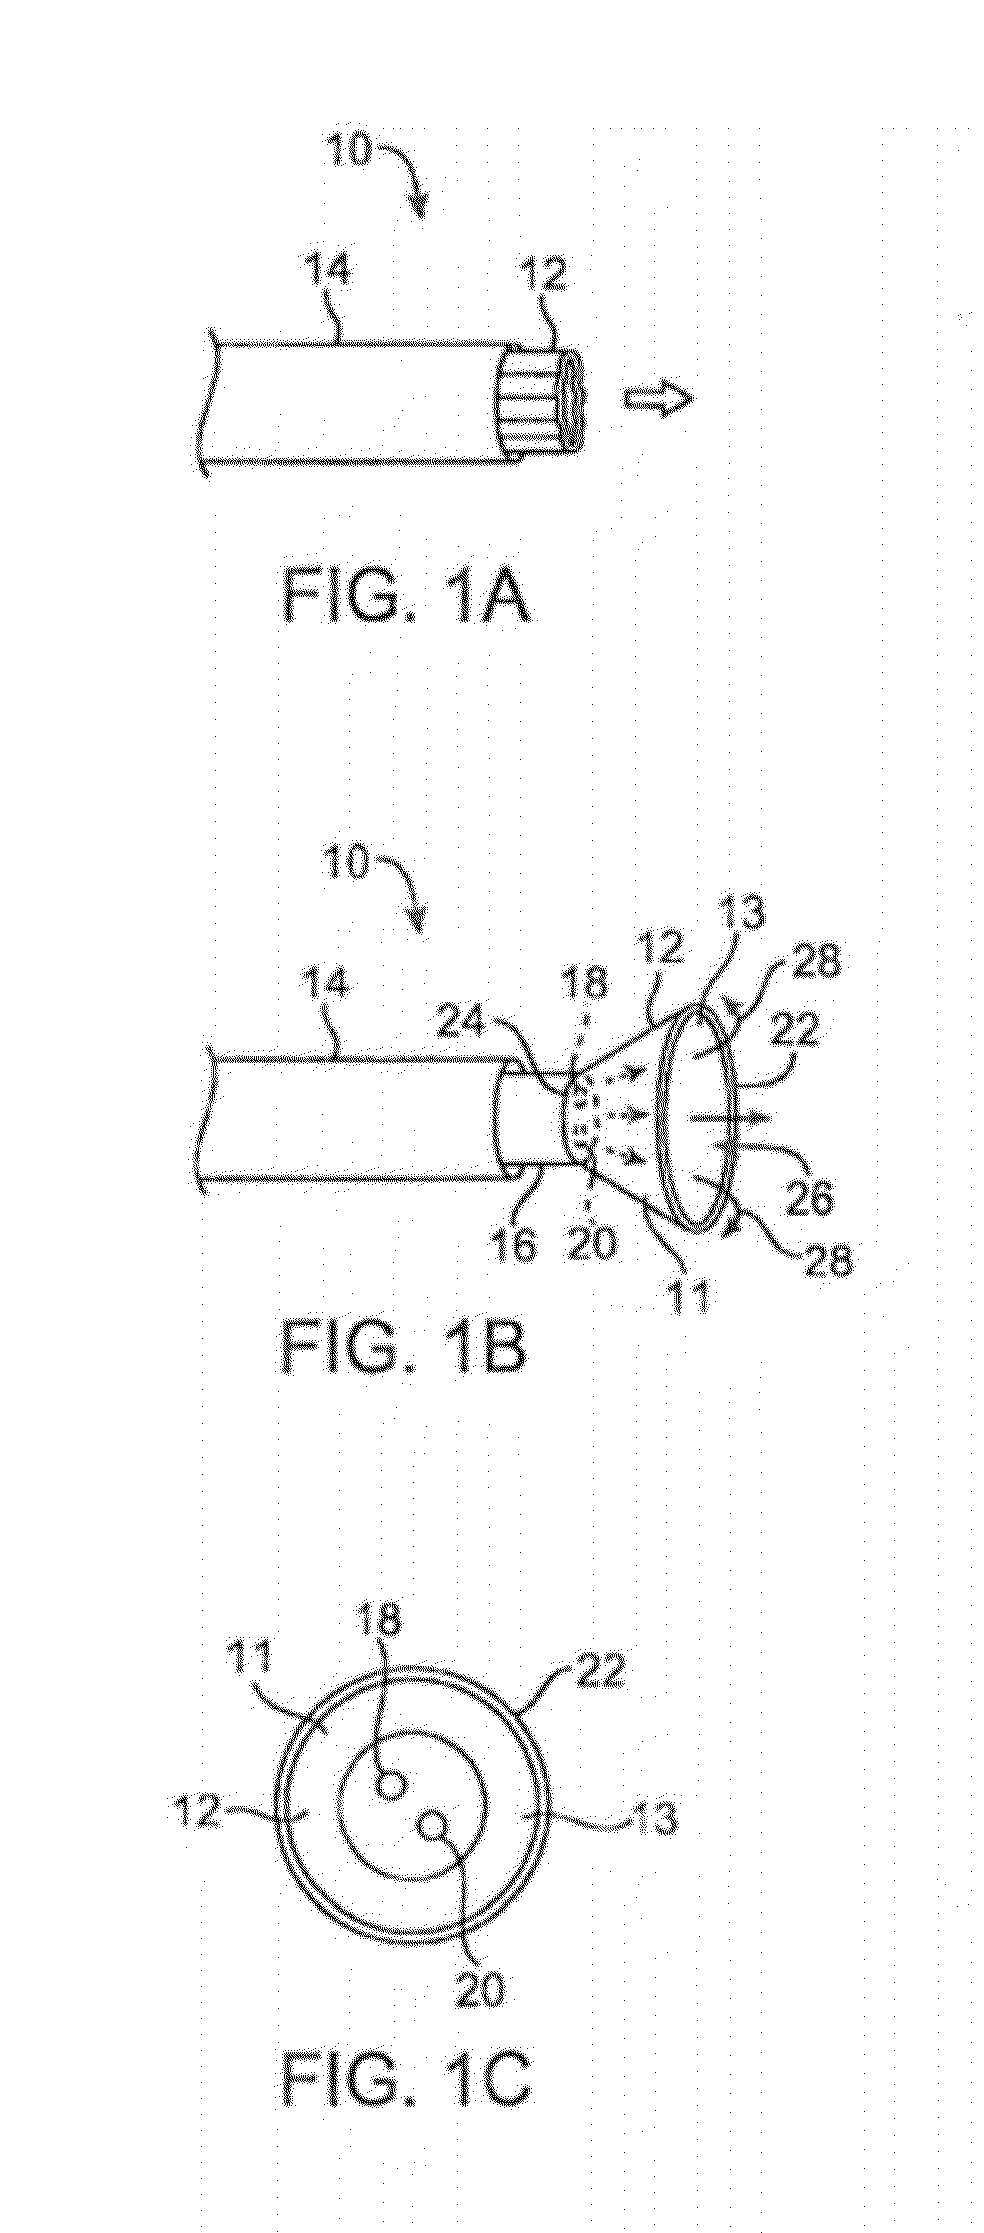 Apparatus and methods for ablation efficacy